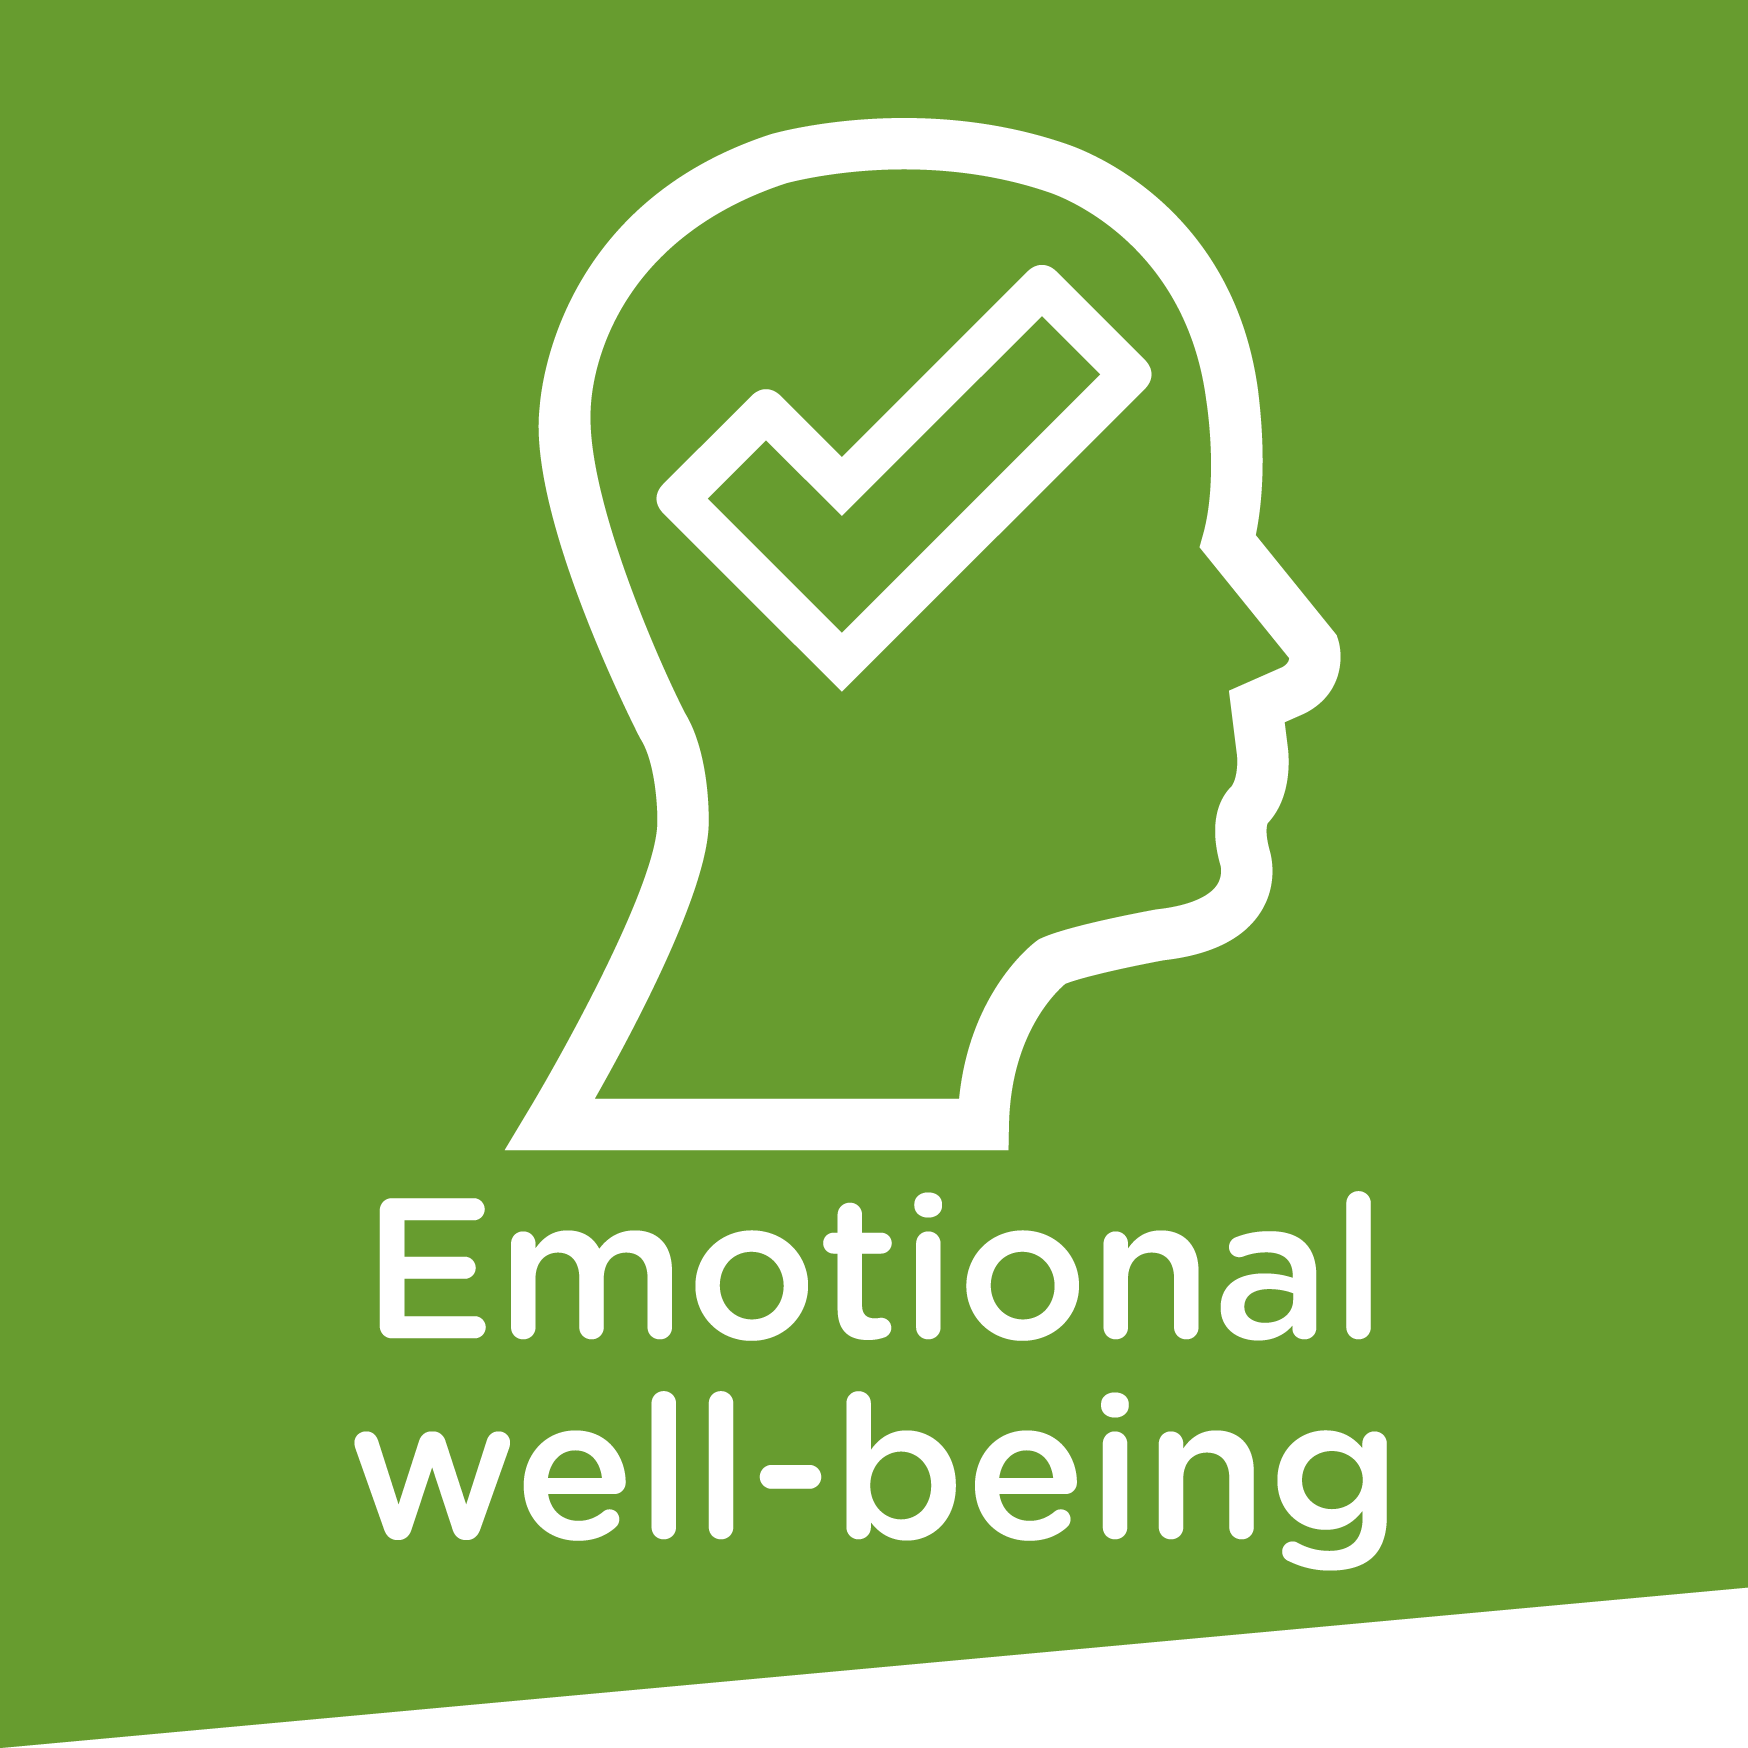 Emotional well-being